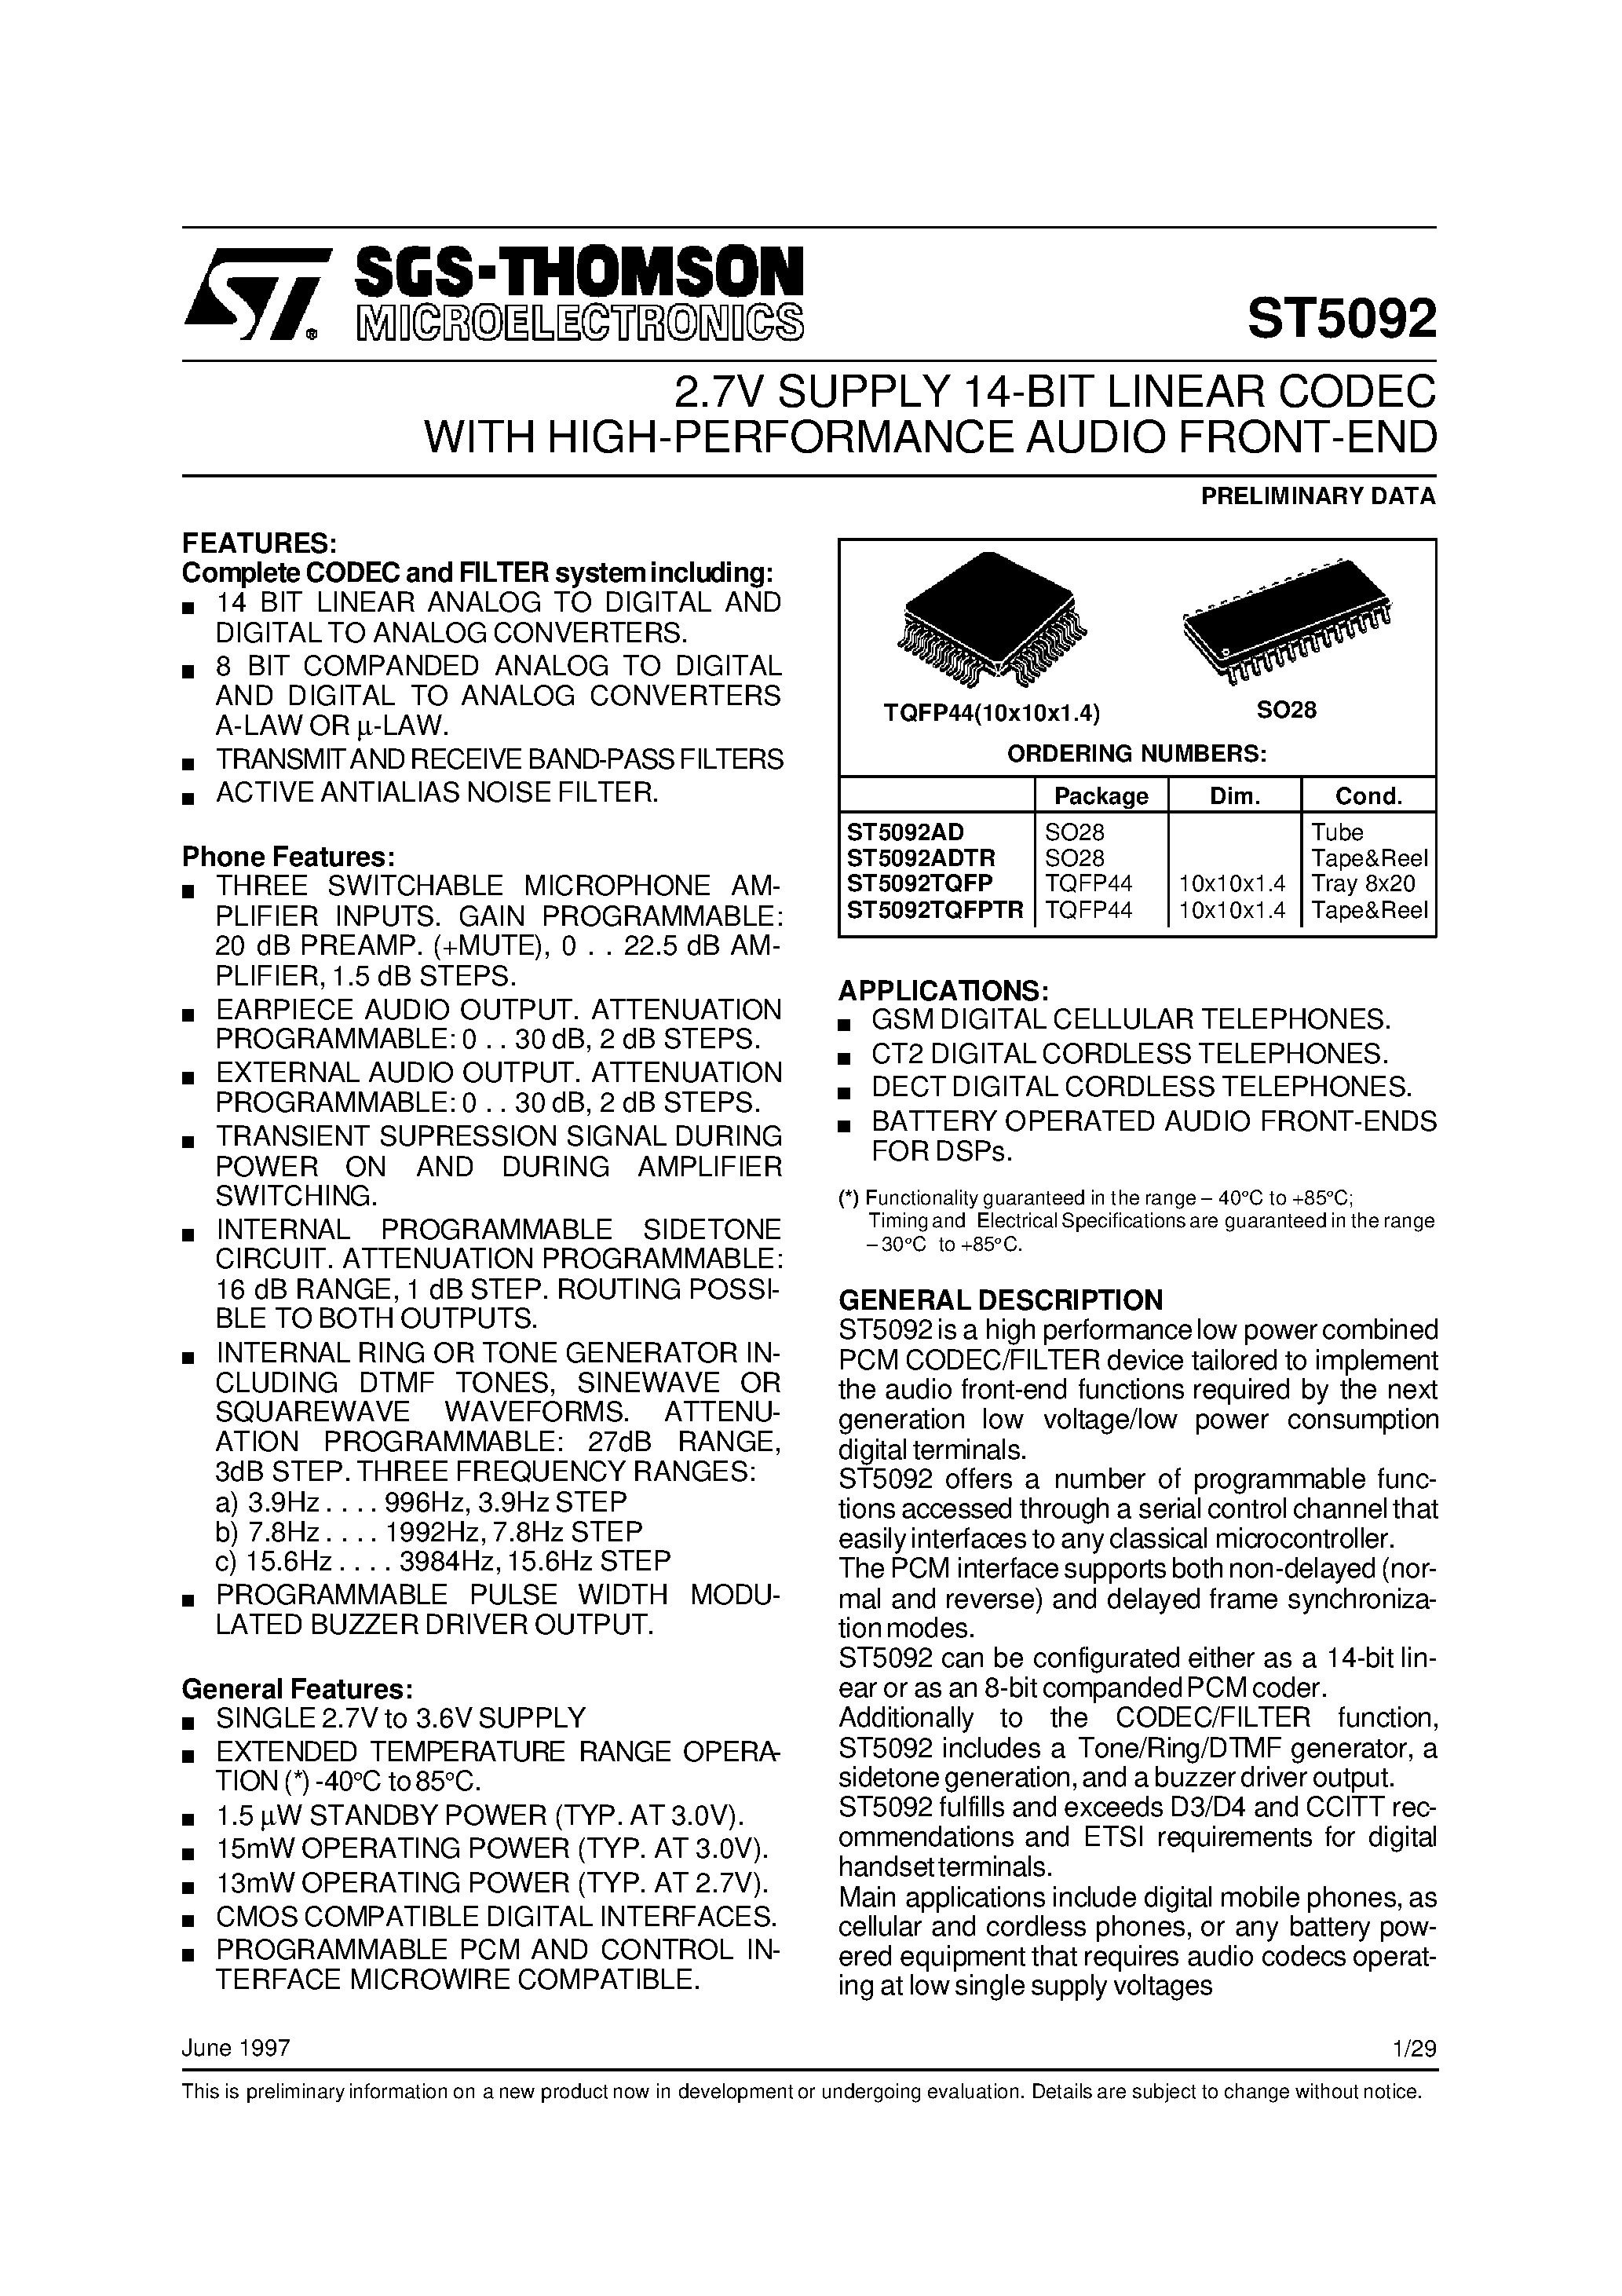 Даташит ST5092-2.7V SUPPLY 14-BIT LINEAR CODEC WITH HIGH-PERFORMANCE AUDIO FRONT-END страница 1